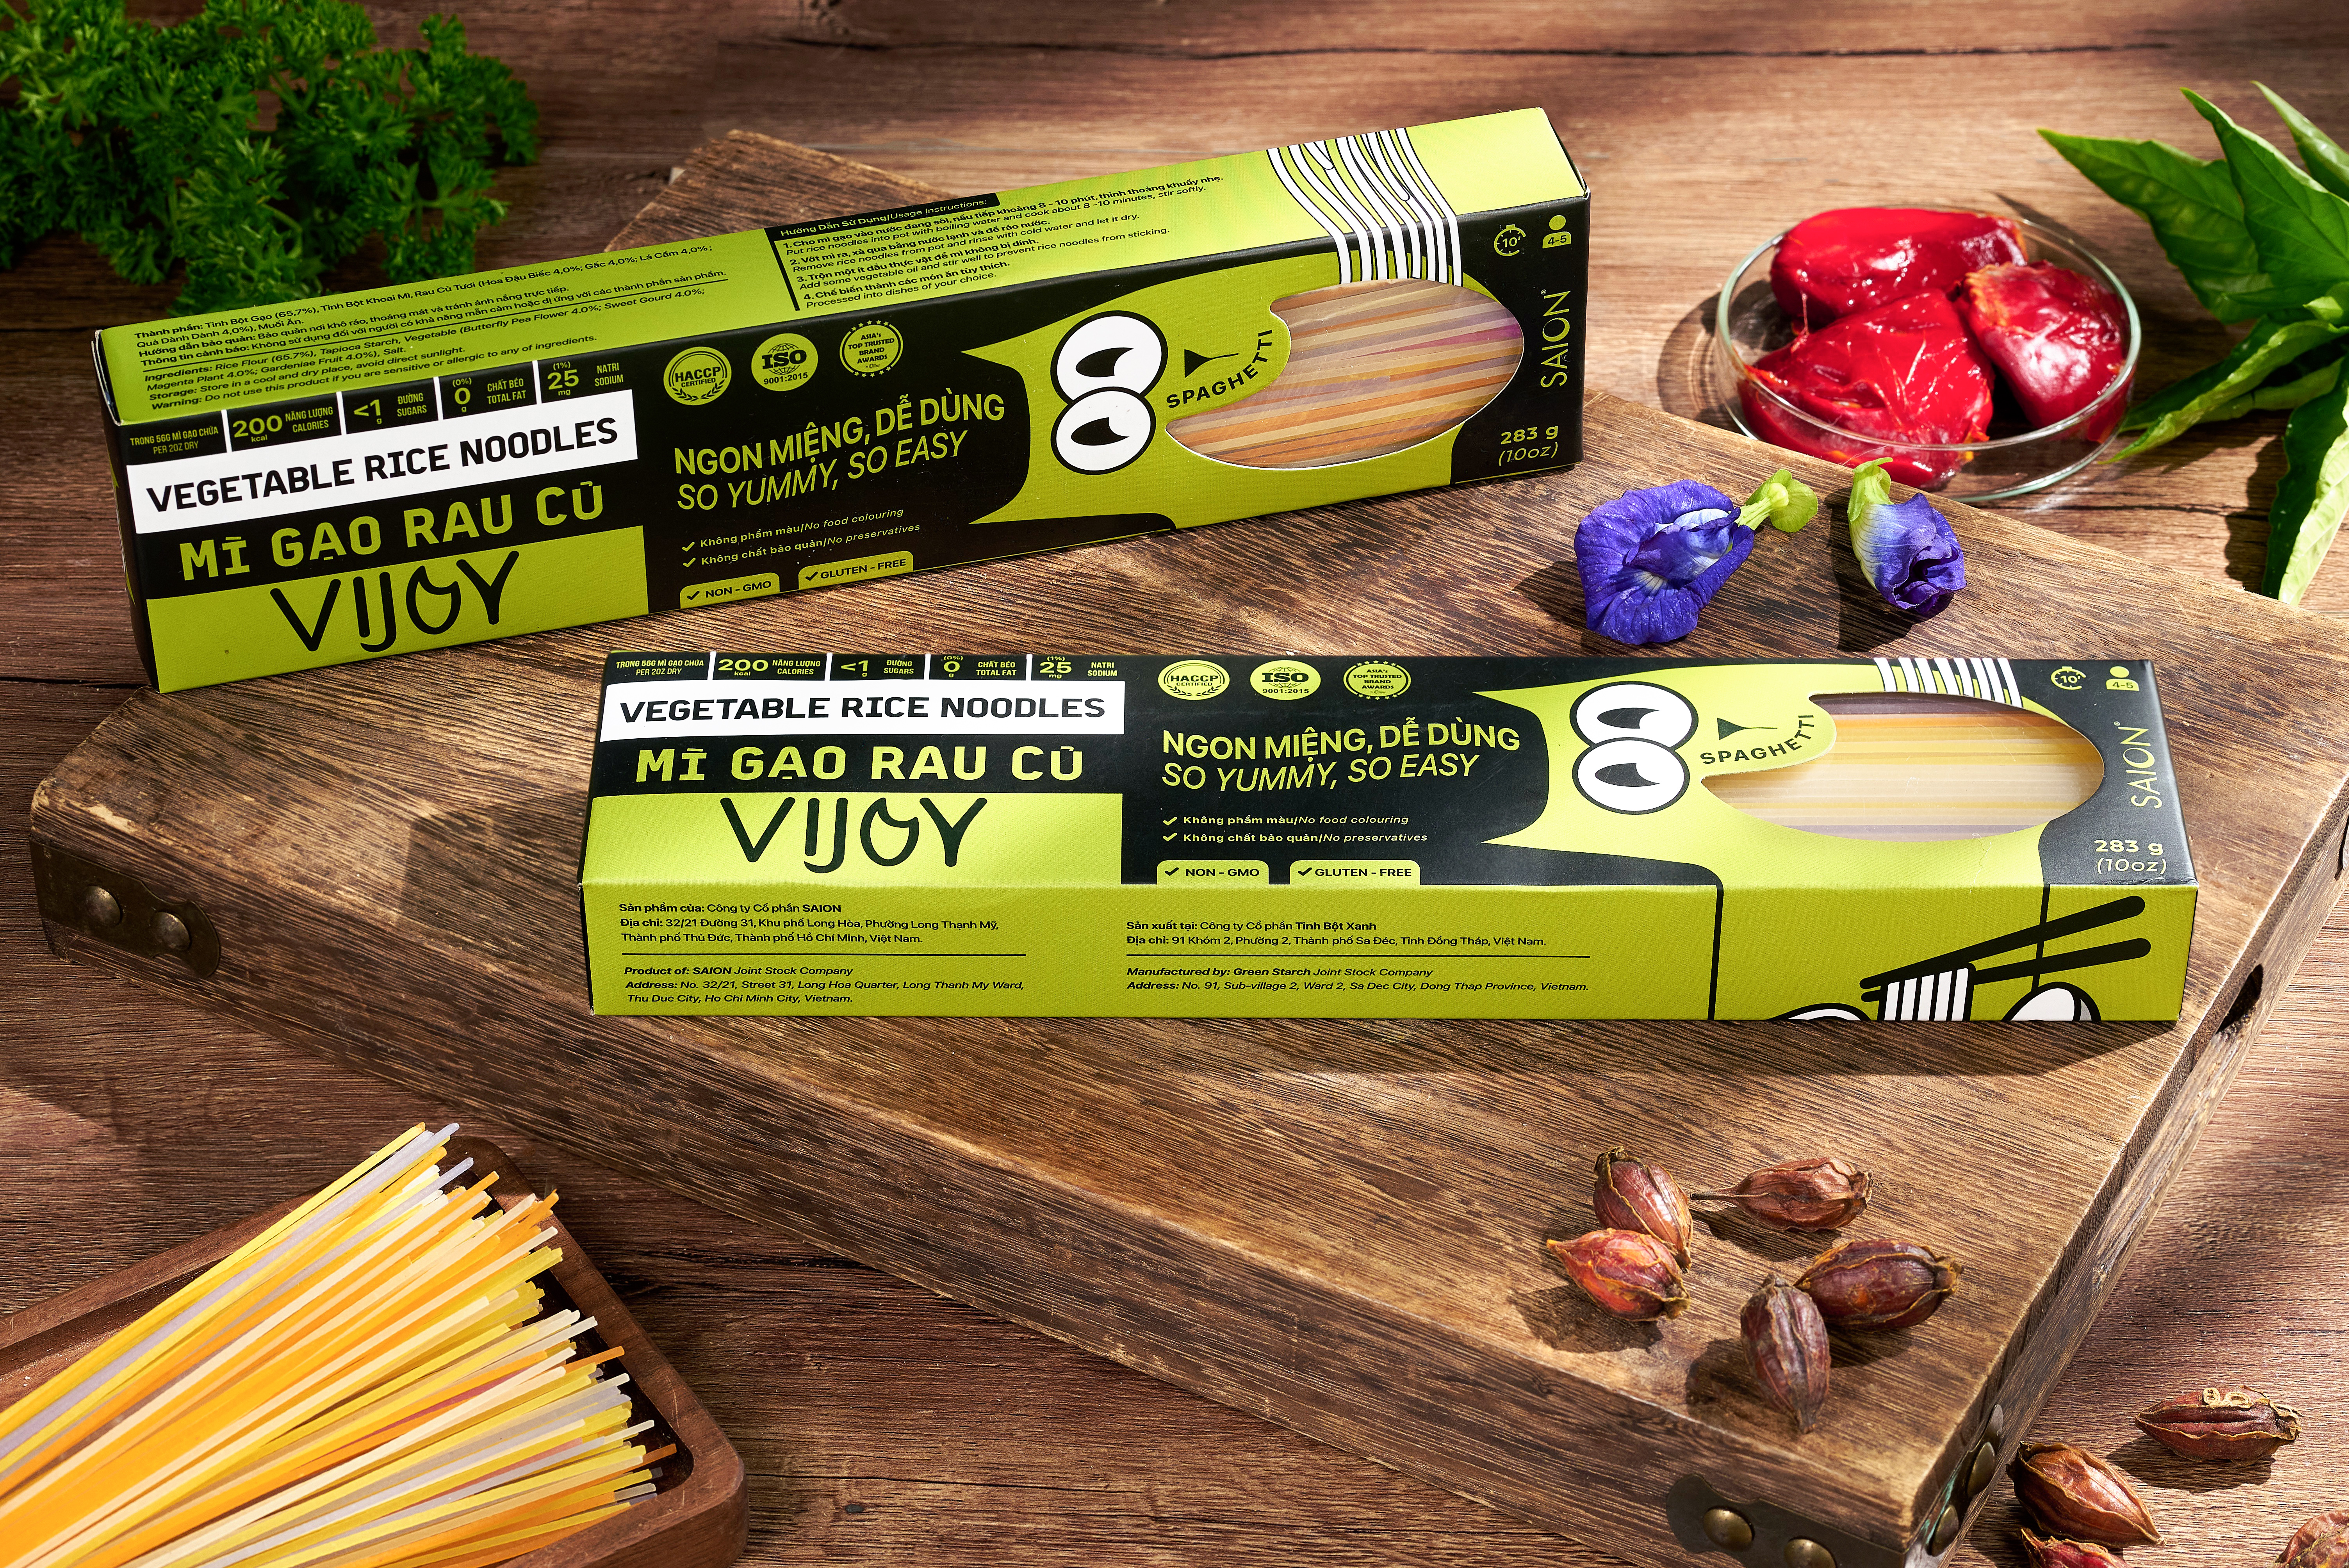 VIJOY RICE VERMICELLI - A JOURNEY OF CONQUERING CONSUMERS